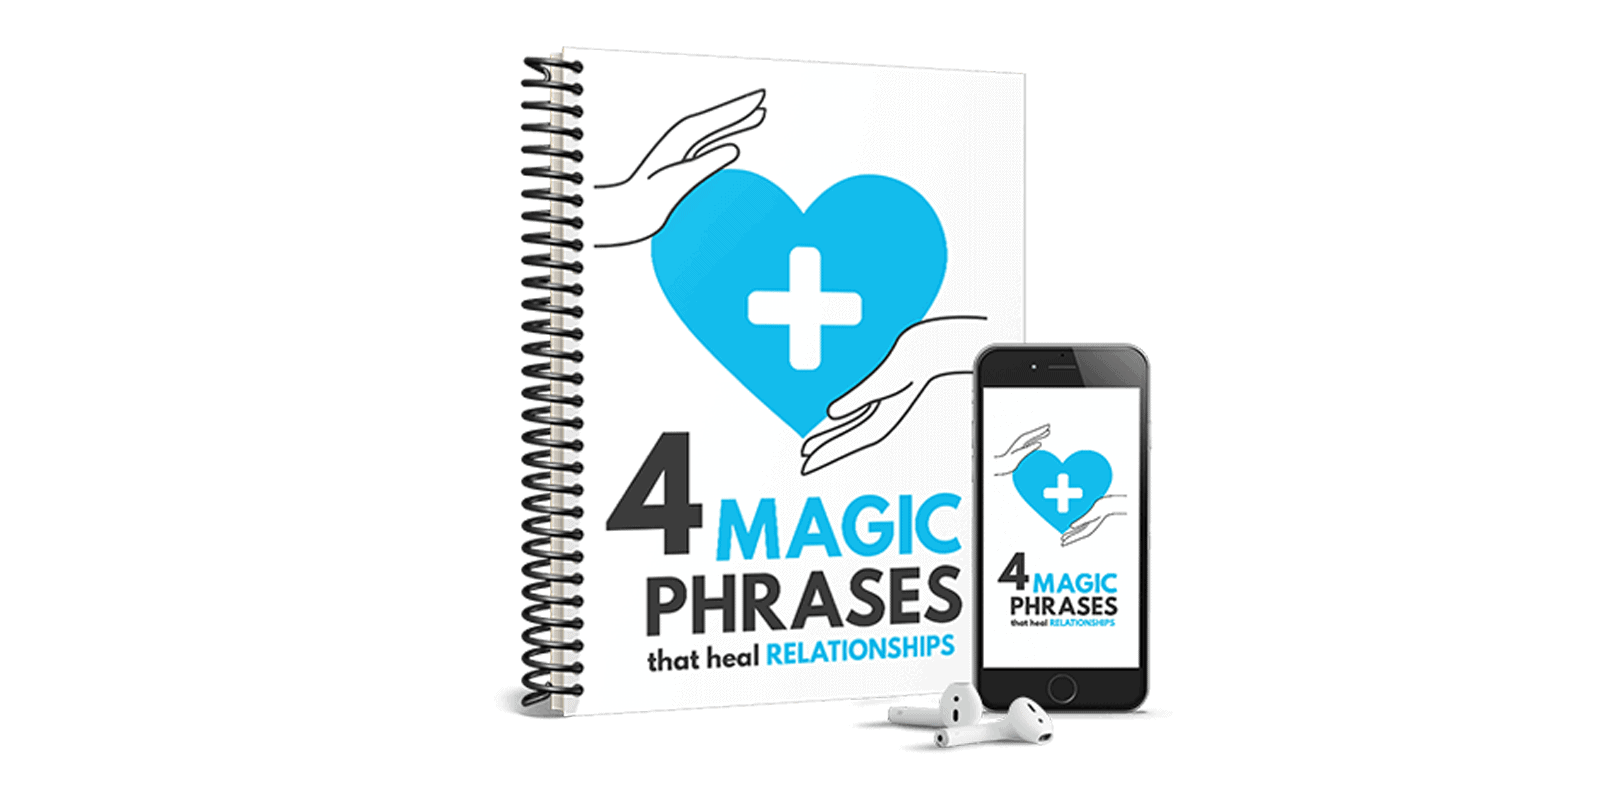 4 Magic Phrases That Heal Relationships